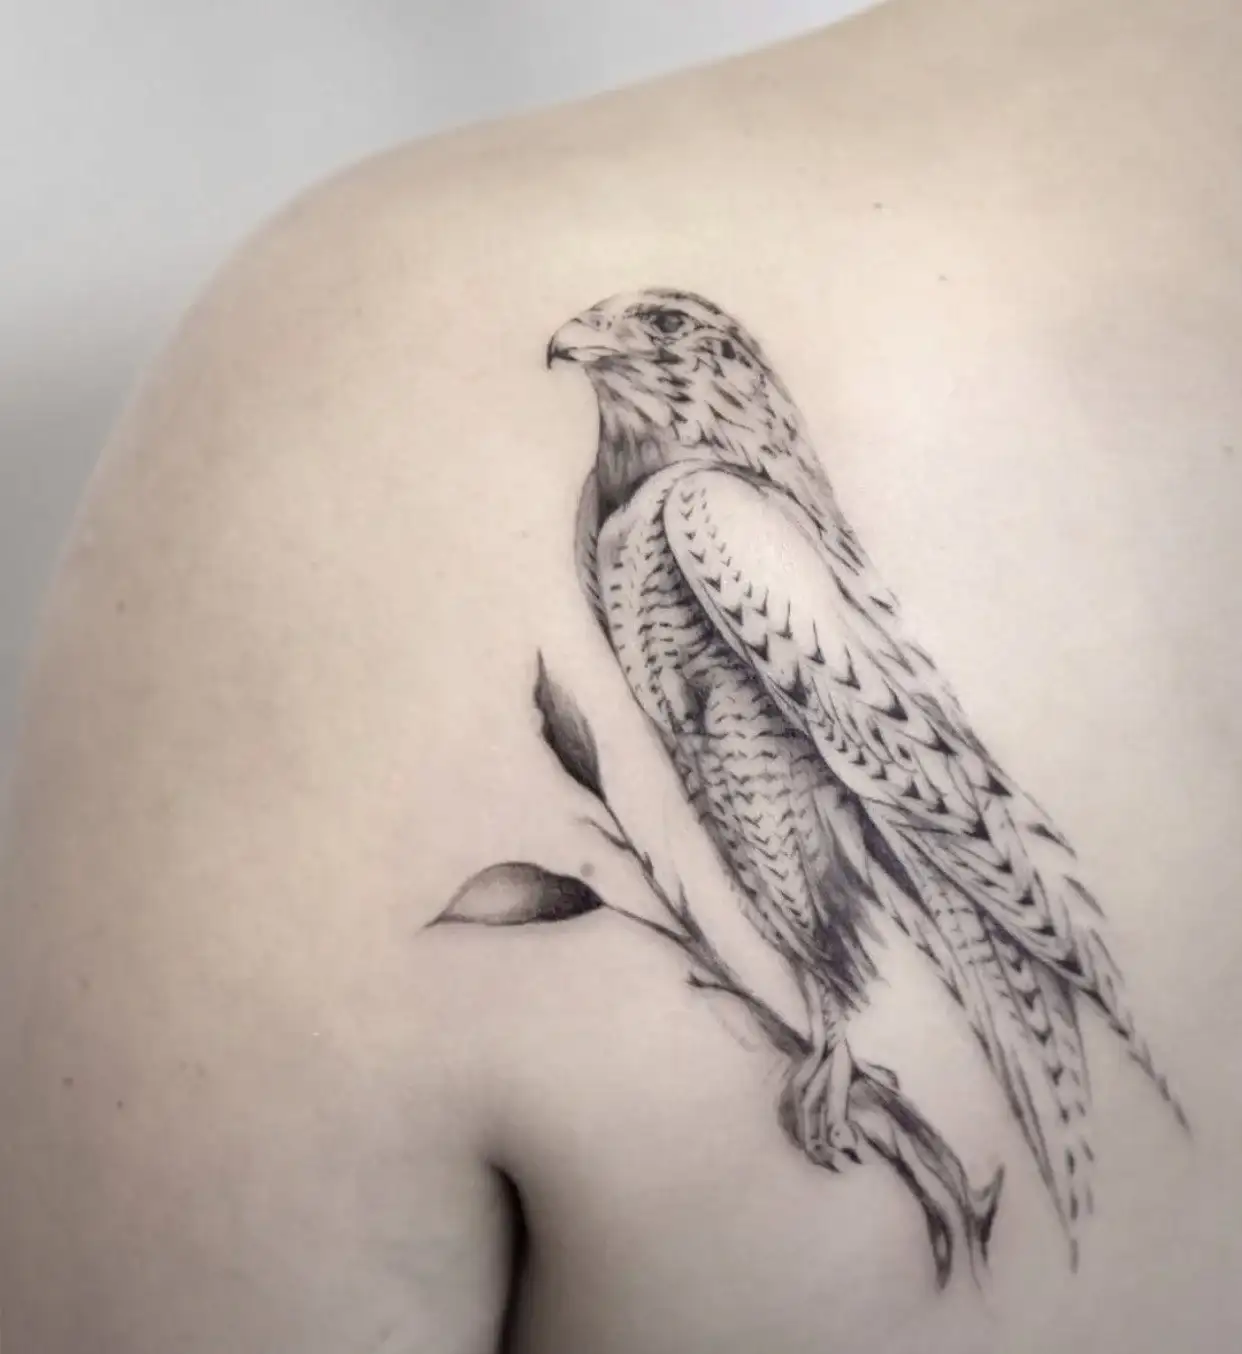 Tattoo uploaded by Robert Davies • Falcon Tattoo by Gordon Combs #falcon  #traditional #traditionalanimal #animal #traditionalartist #GordonCombs •  Tattoodo